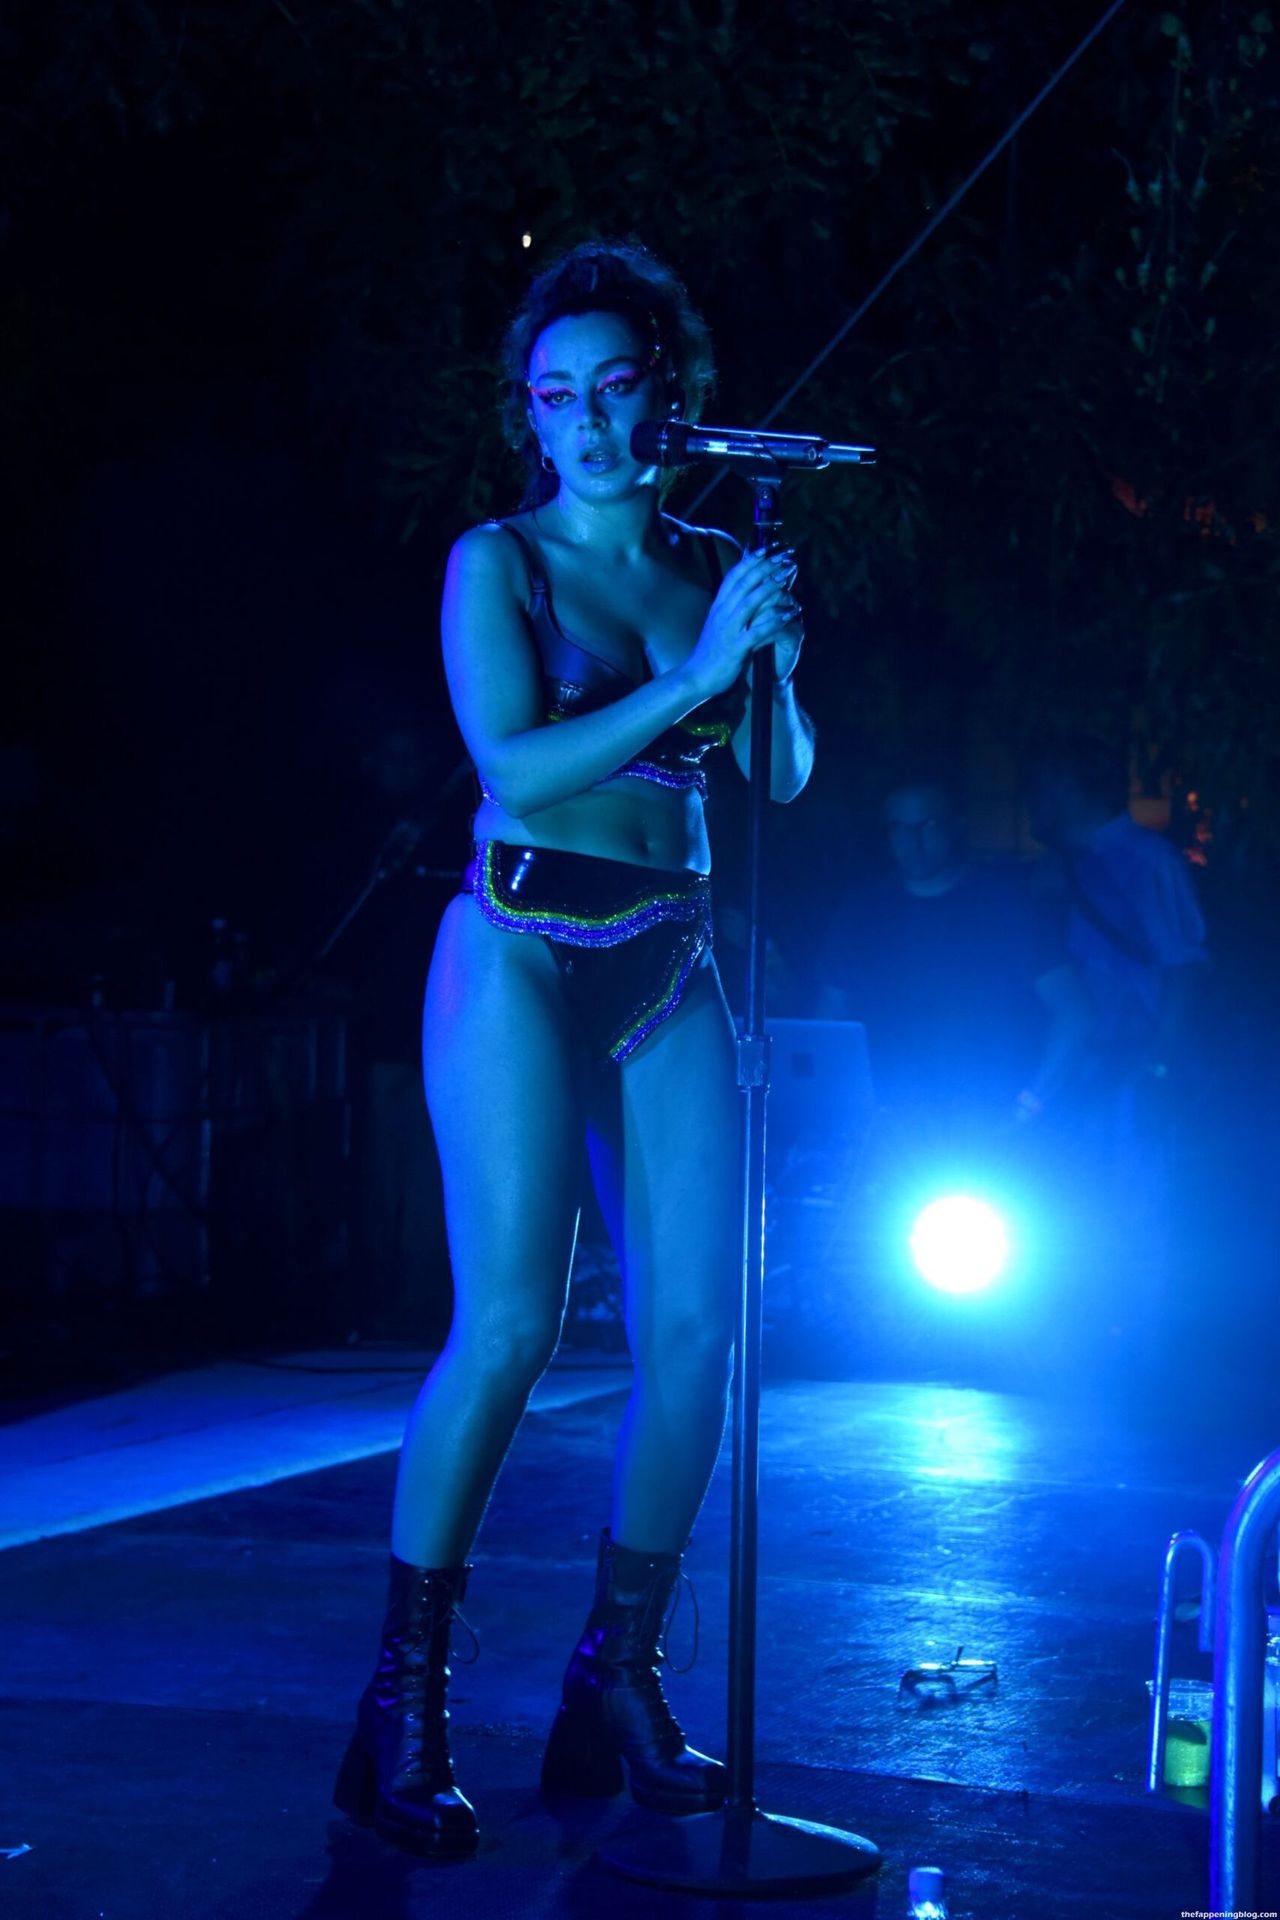 Charli-XCX-Sexy-on-Stage-10-thefappeningblog.com_.jpg